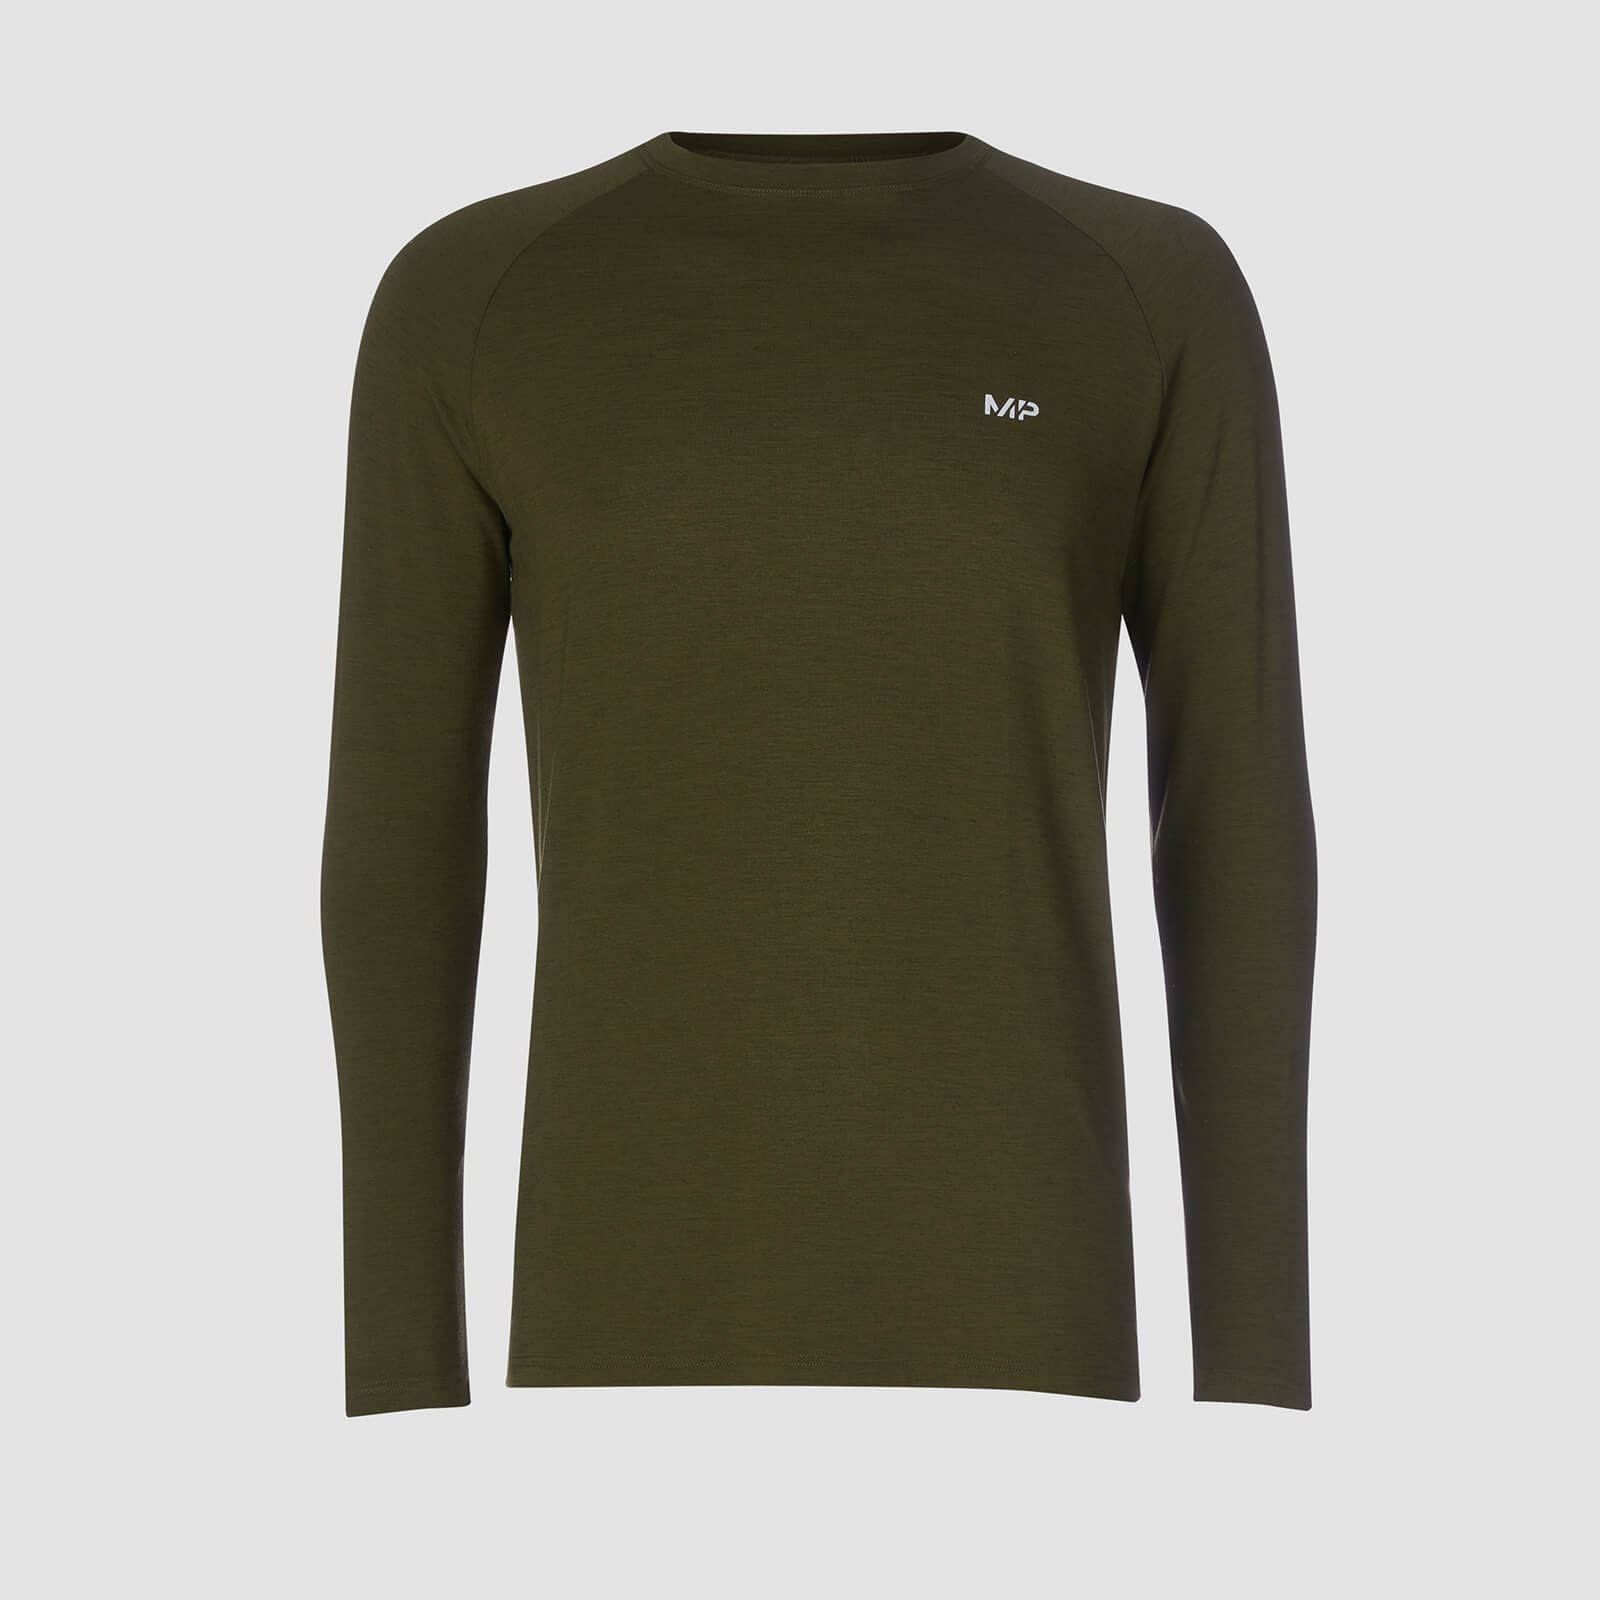 Myprotein T-shirt Performance Long Sleeve MP - Verde militare/Nero - S